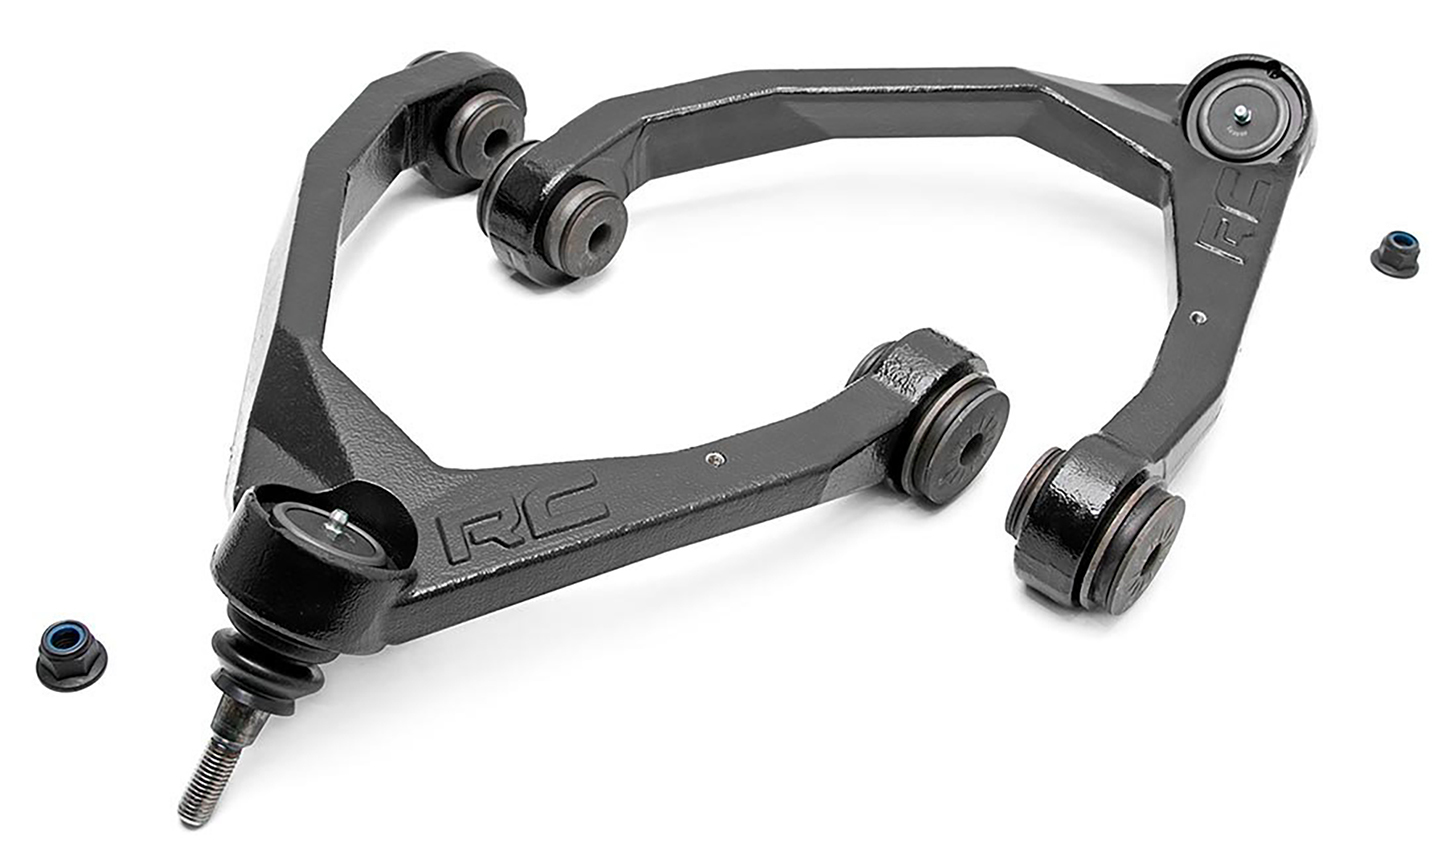 Rough Country 19401A Control Arm, Upper, Ball Joint / Bushings Included, Steel, Black Powder Coat, GM Fullsize SUV / Truck 2007-16, Pair